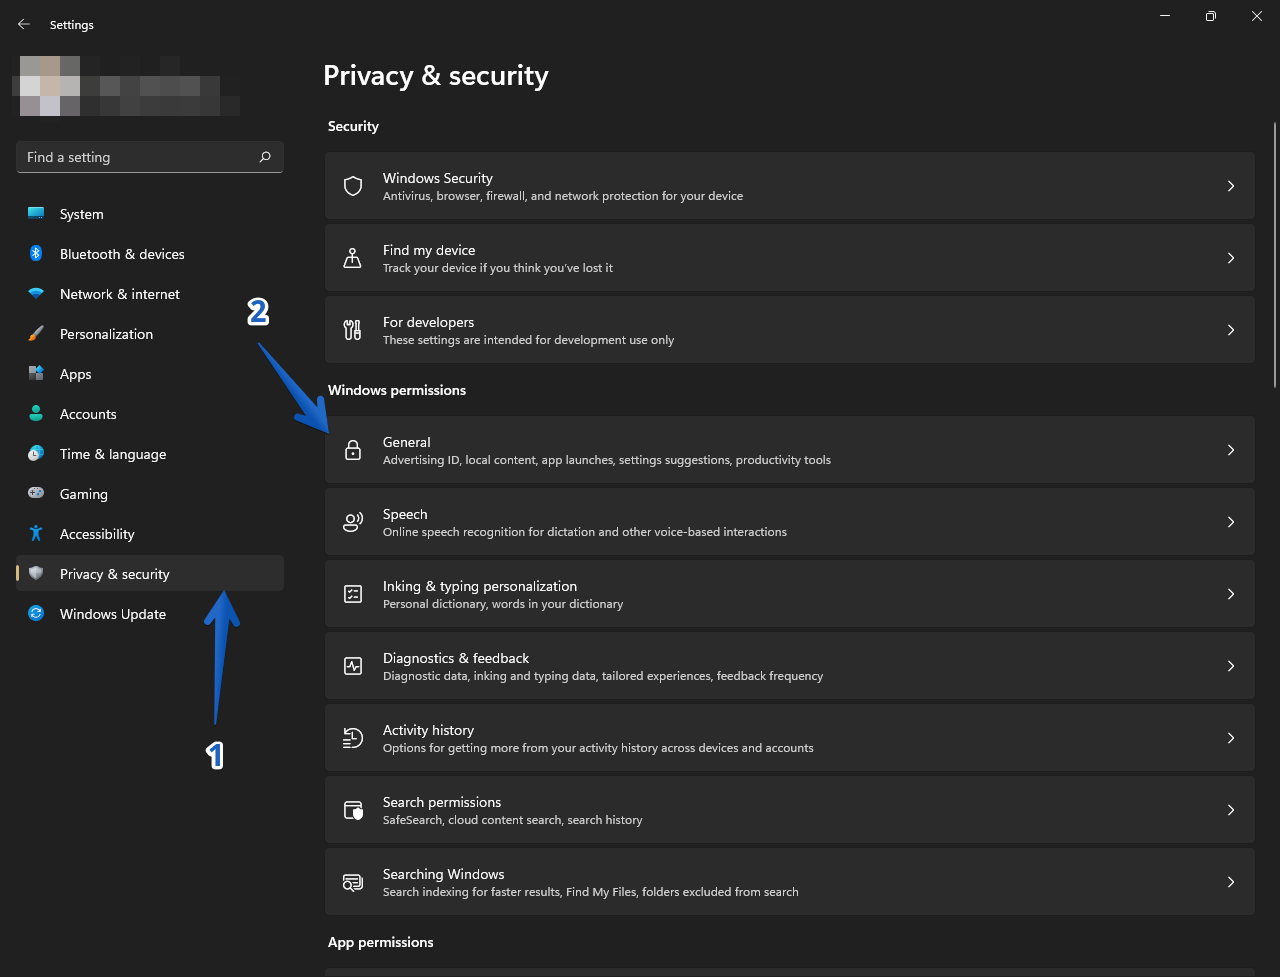 Open general privacy and security settings